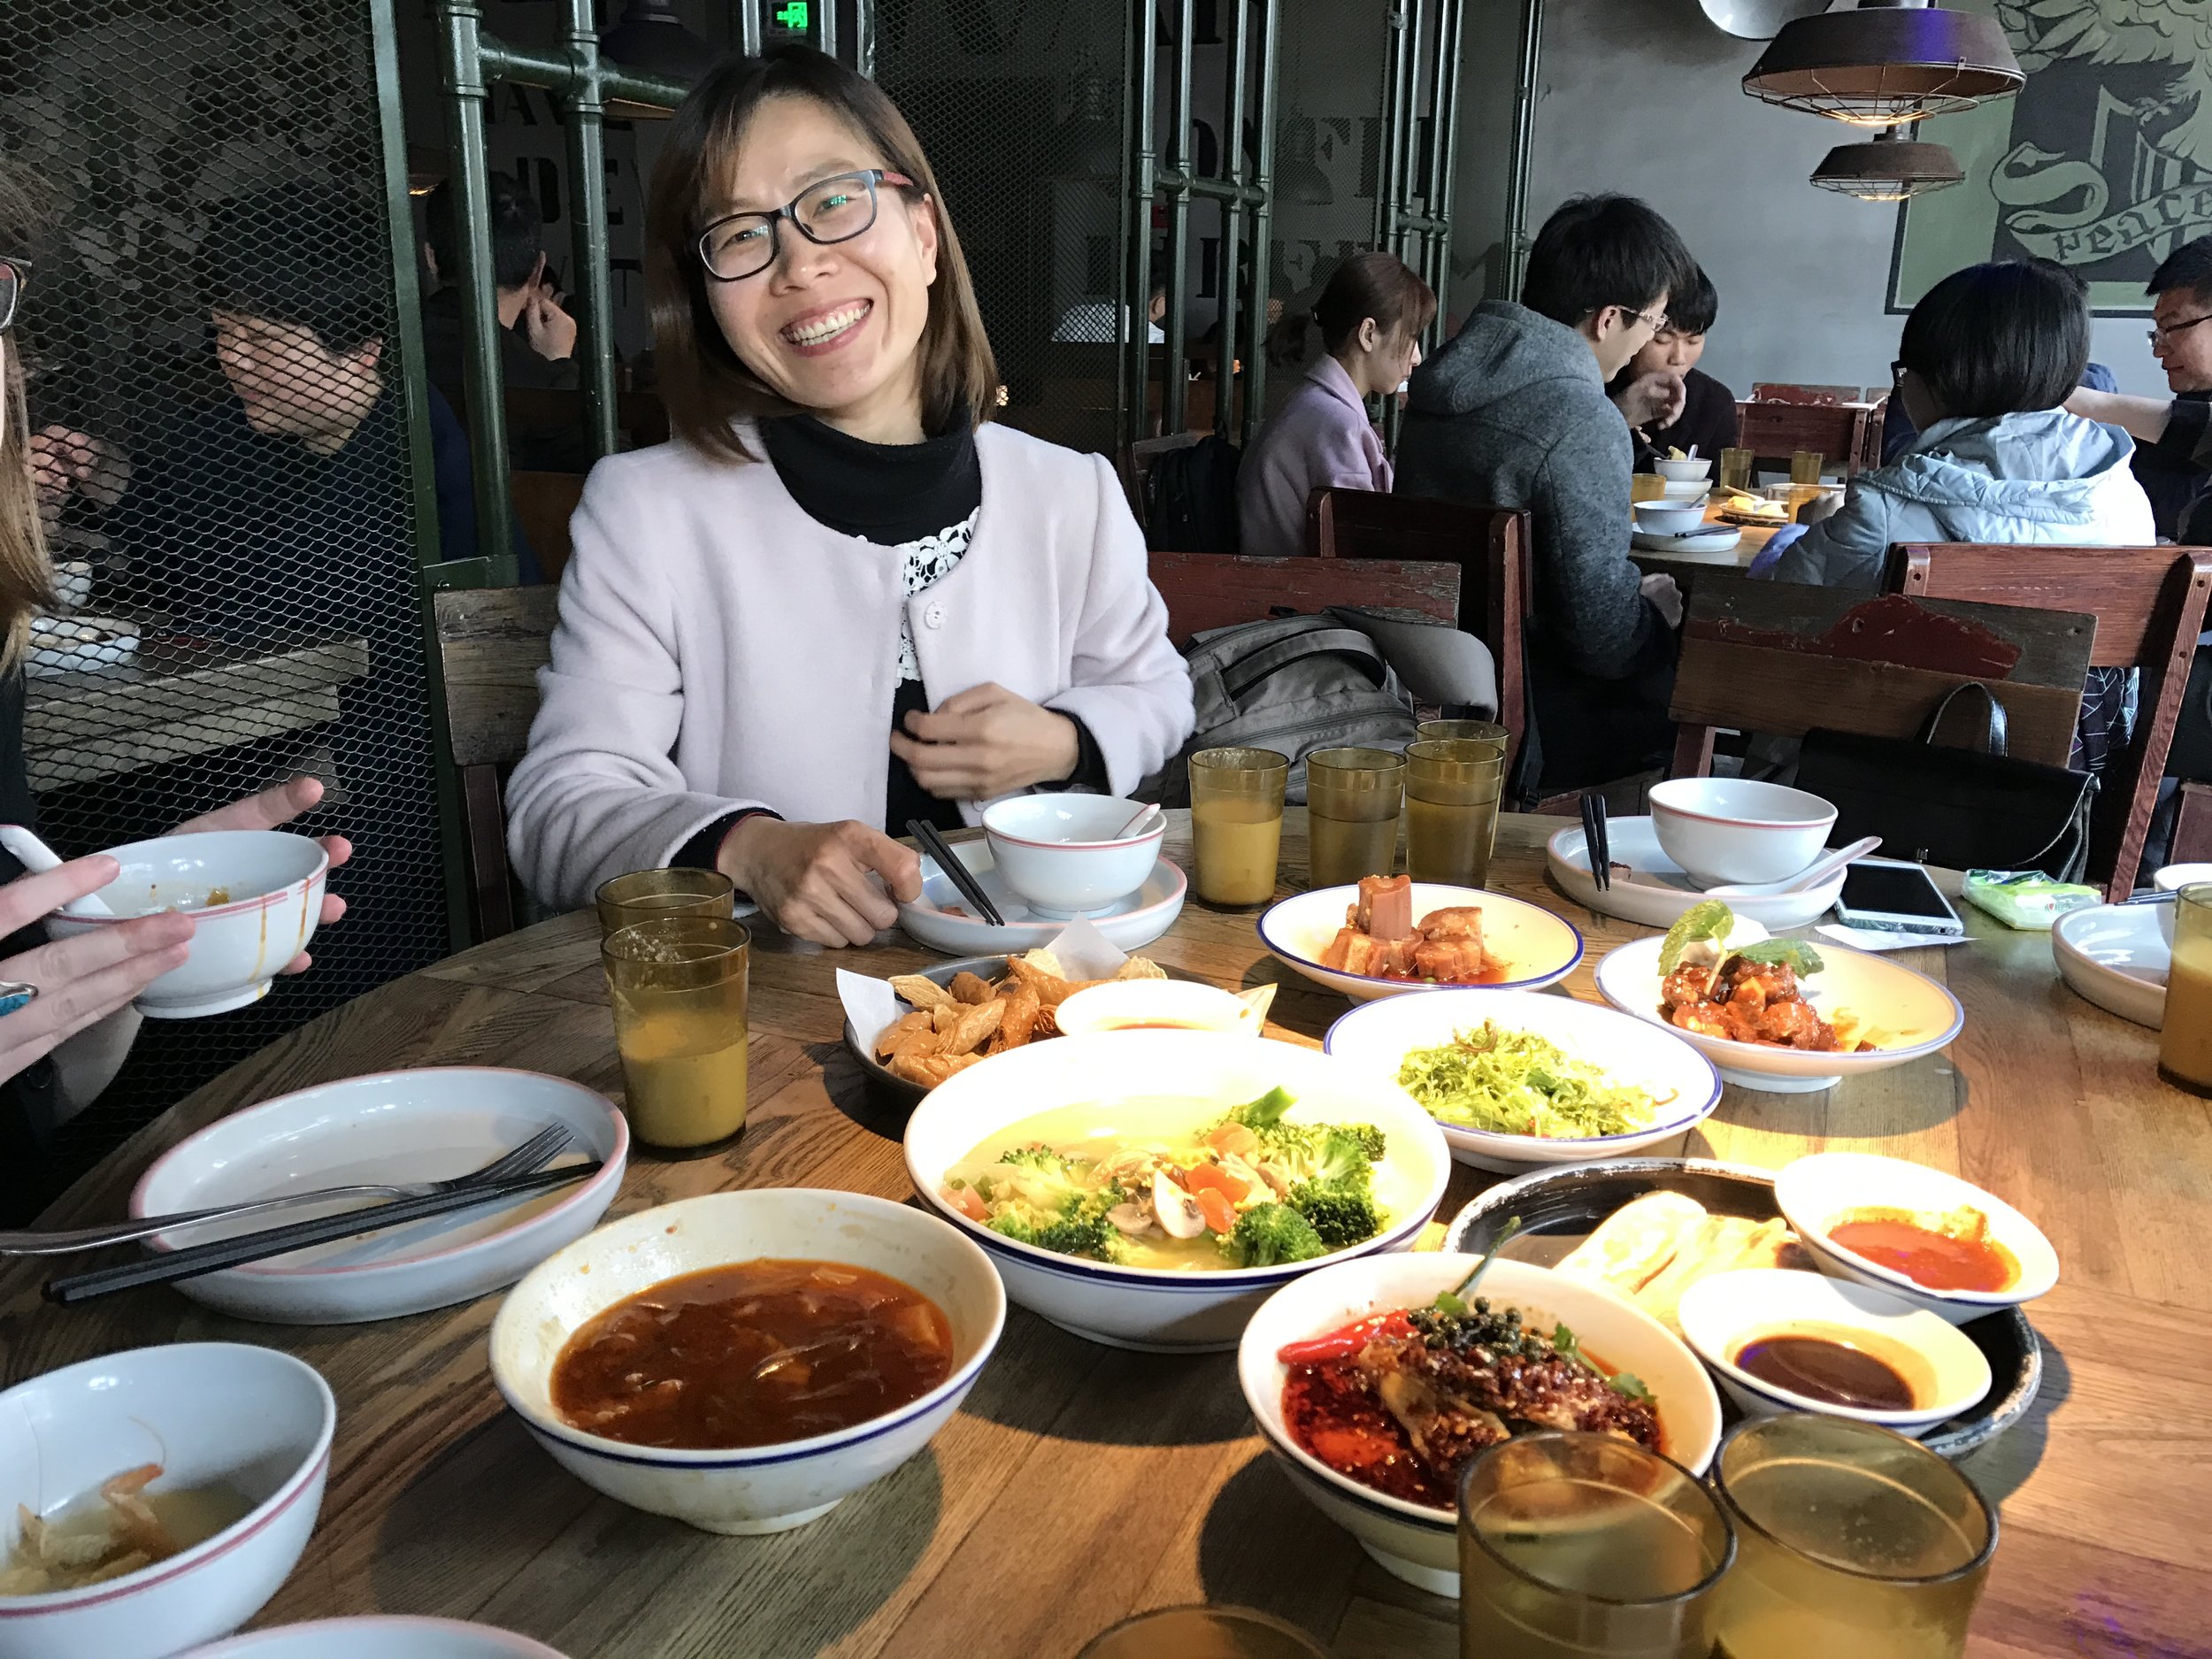  Dr. Fengling Ma, our collaborator at Zhejiang Sci-Tech University, graciously treated us to authentic dishes common to Hangzhou, China. 